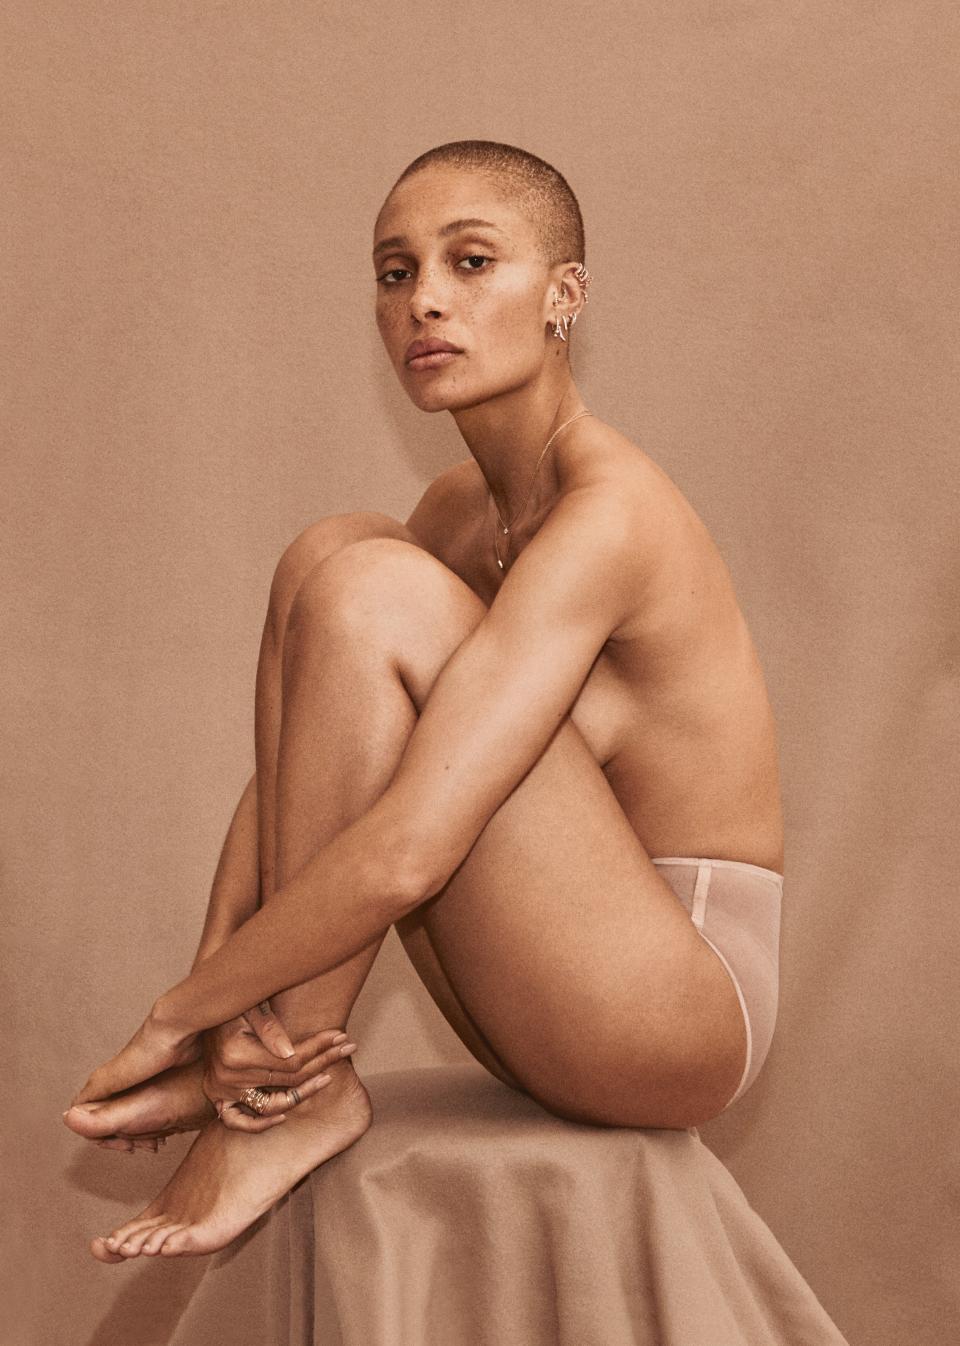 Whether it’s her smile, her moxie, her activism, or a combination of all three, Adwoa Aboah is turning the modeling world upside down.